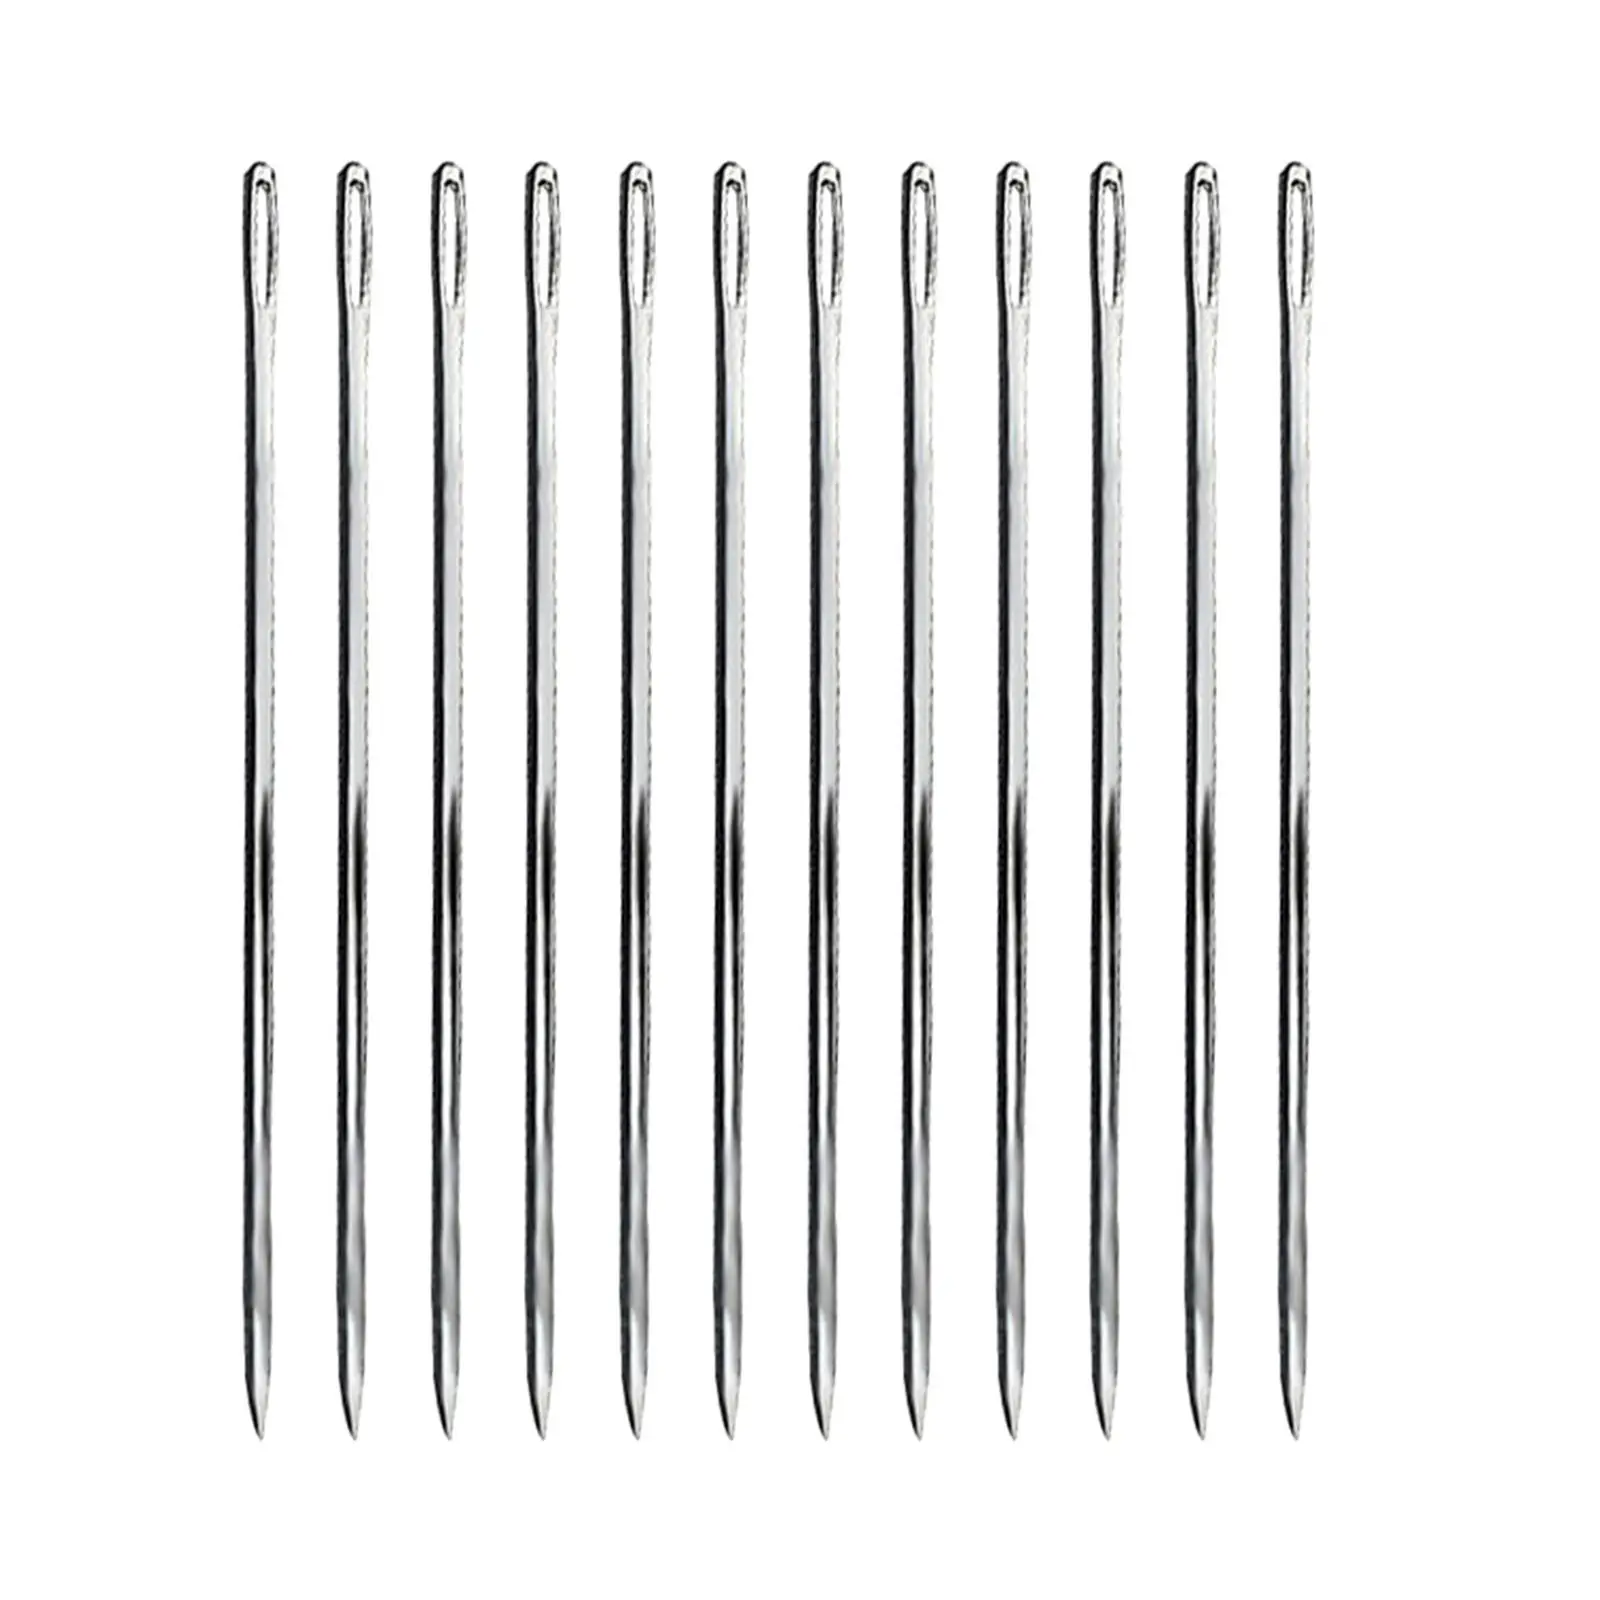 12 PCS 2.36`` Wig Pins Wig I-pins for Holding Wigs and Hair Extensions on Wig Head, Silver